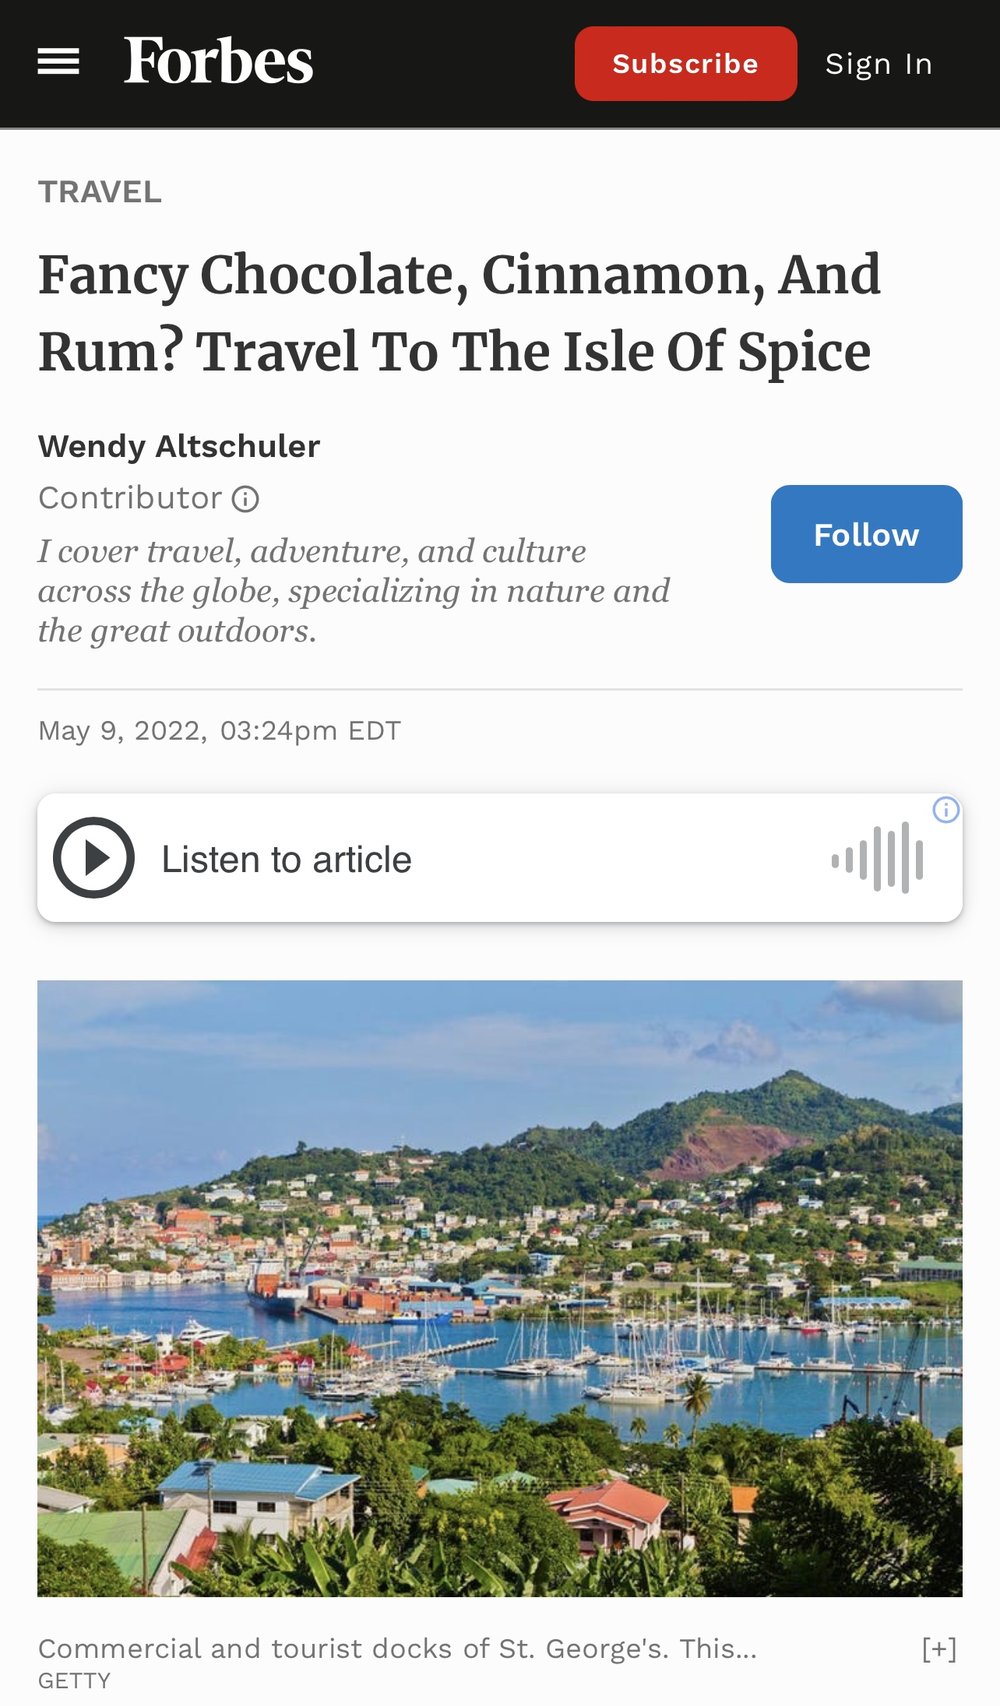 Fancy Chocolate, Cinnamon, And Rum? Travel To The Isle Of Spice